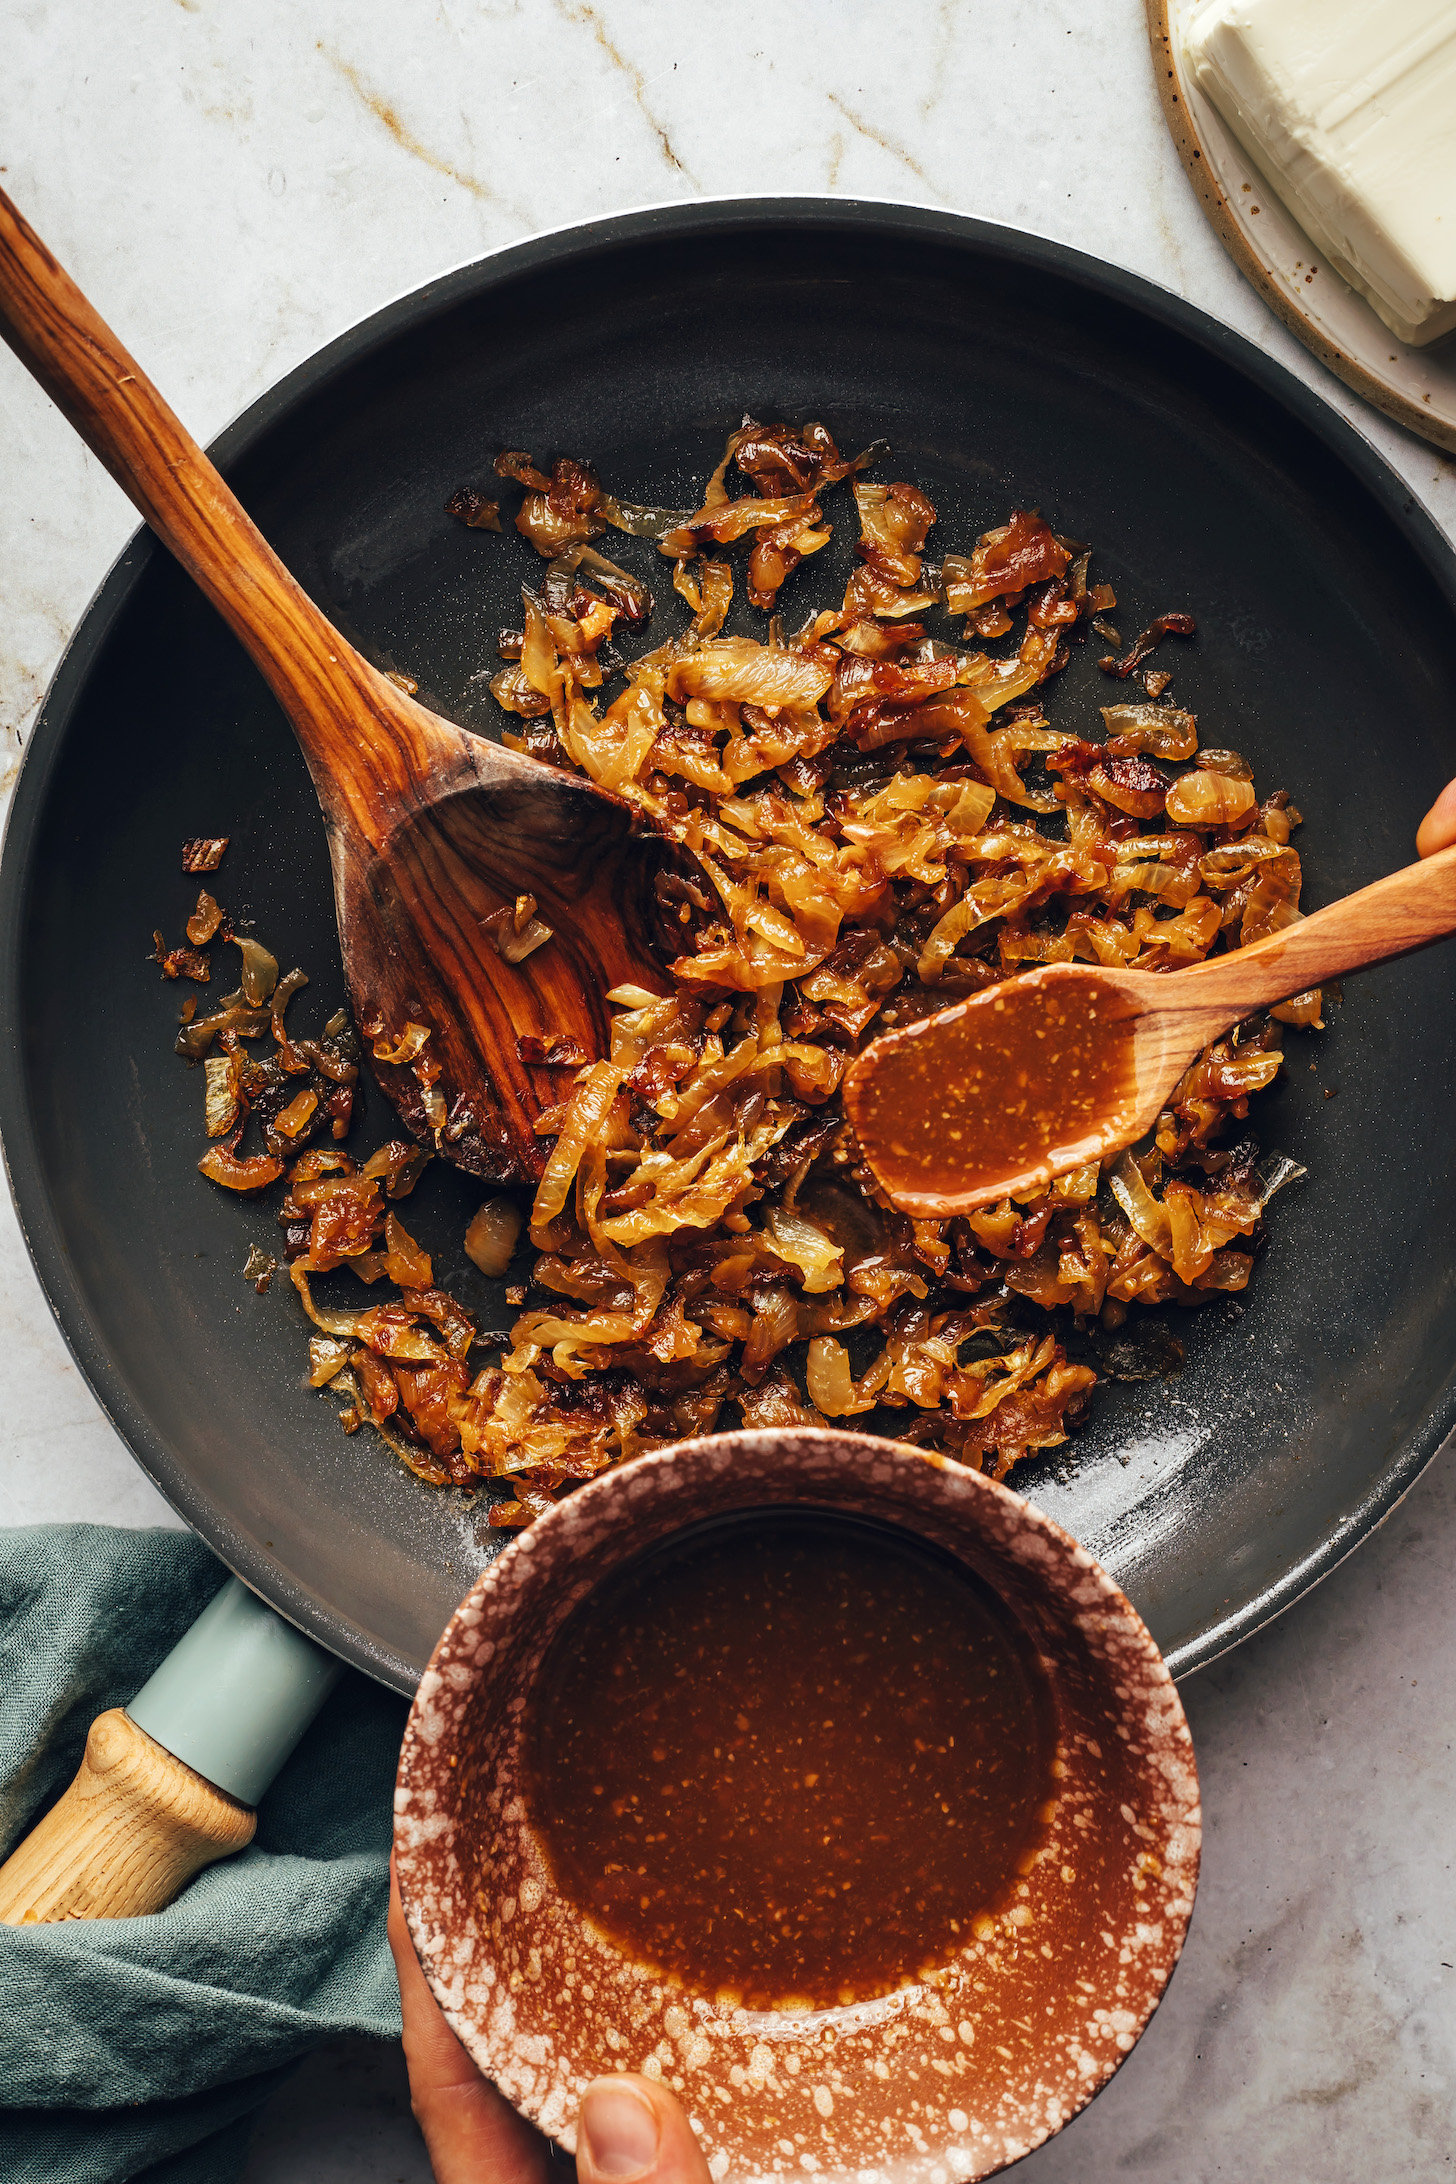 Using a spoon to add a savory, tamari-miso-vinegar sauce to a skillet of caramelized onions